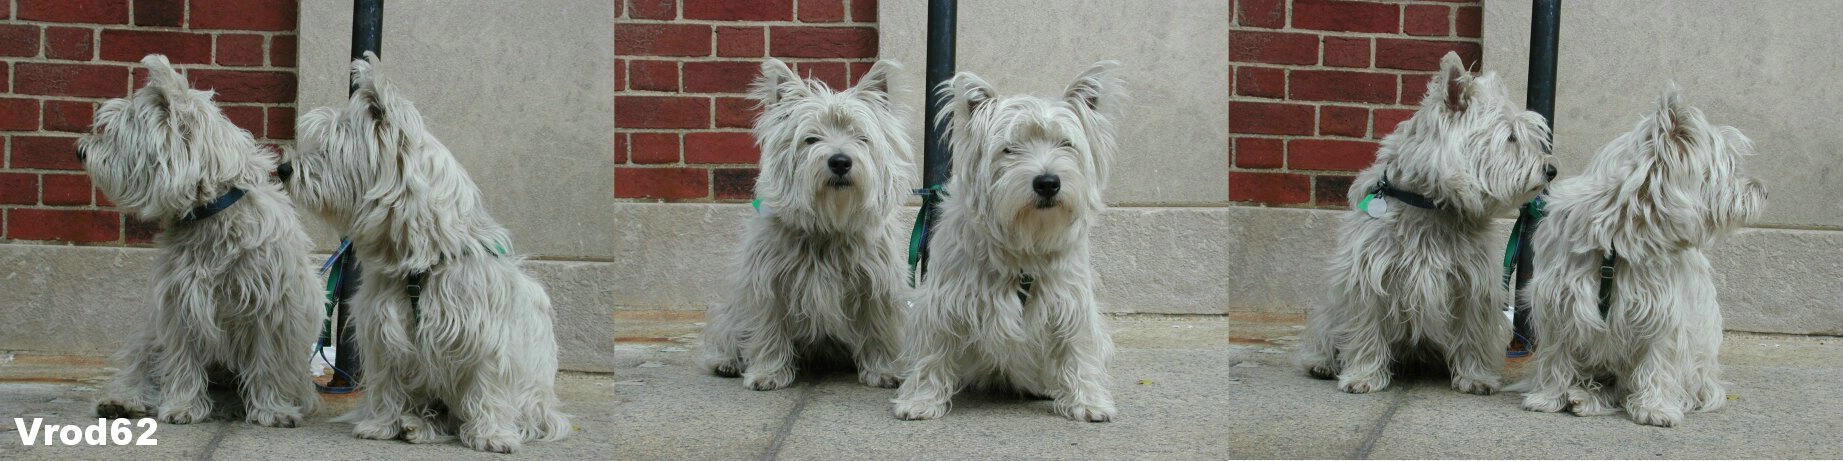 Bronxville Pooches